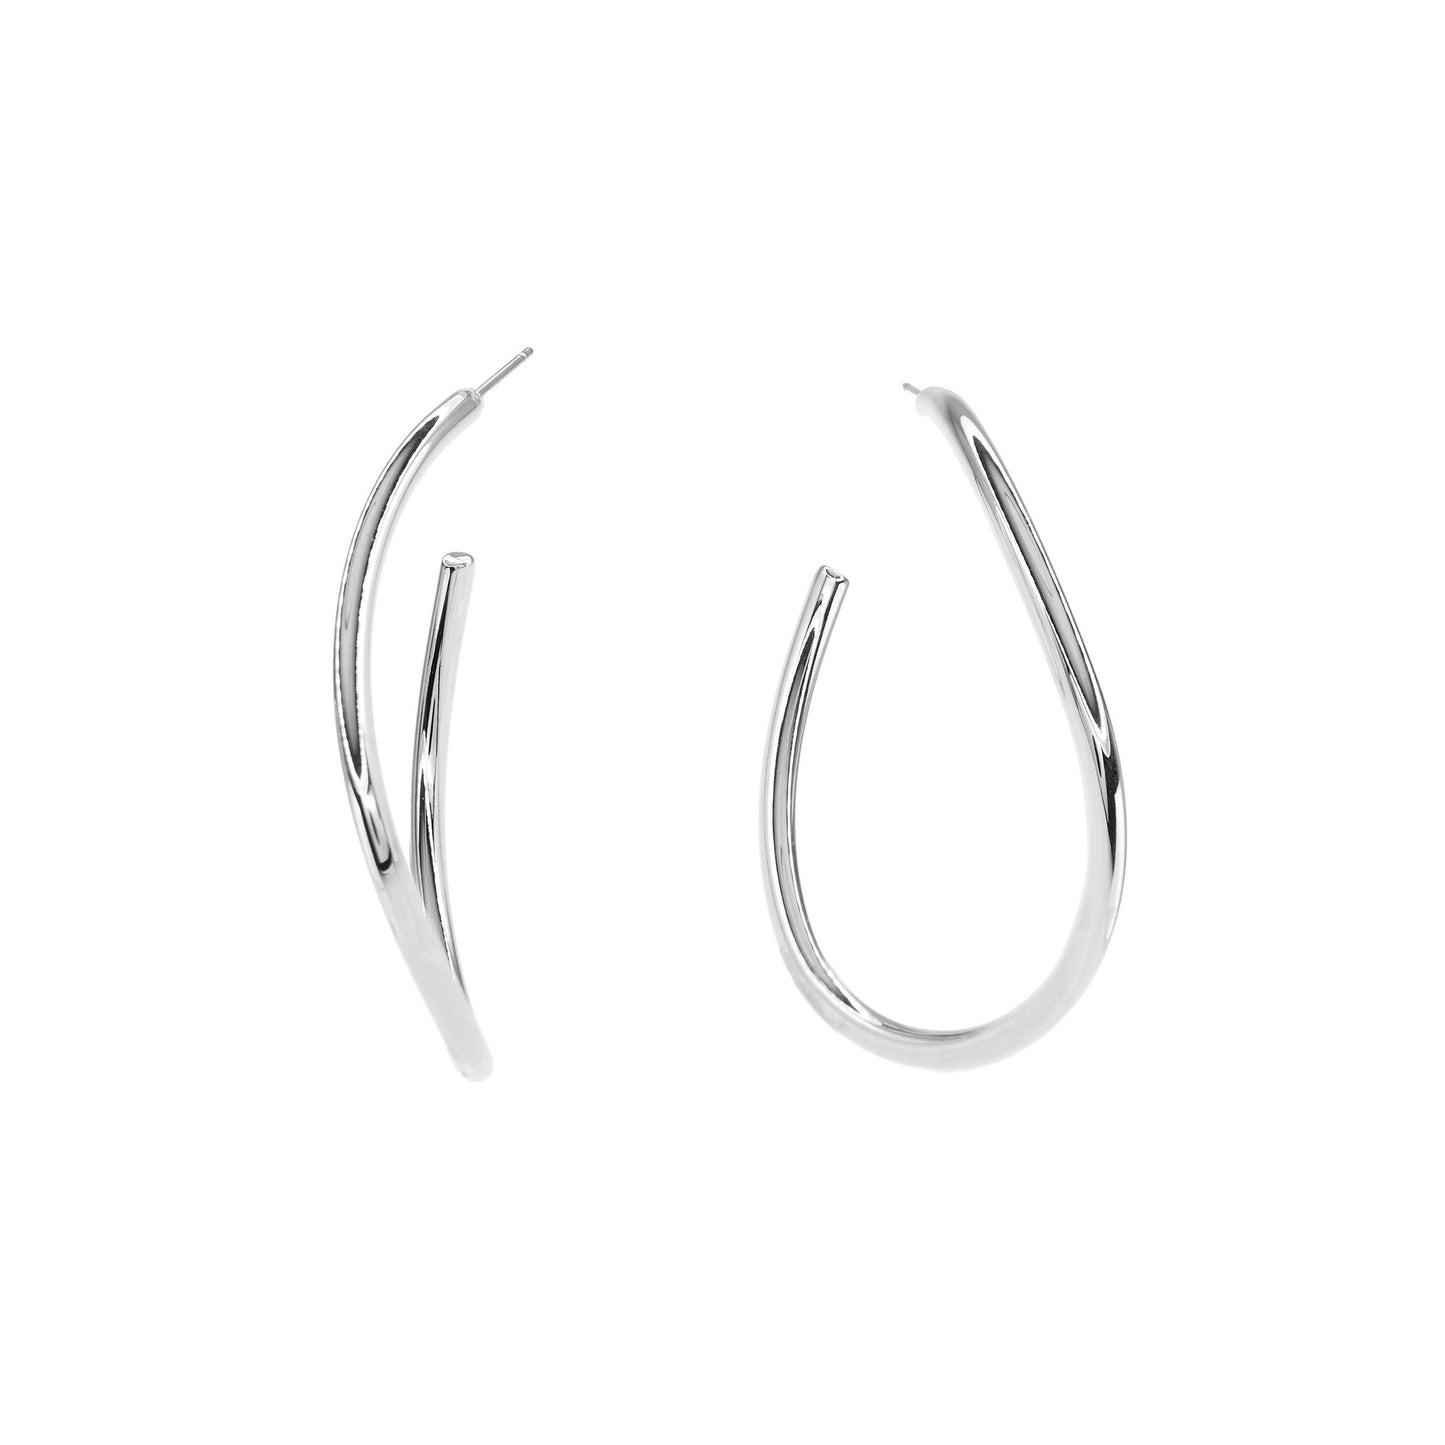 Artistic Oval-Shaped Earrings in Rhodinated Sterling Silver